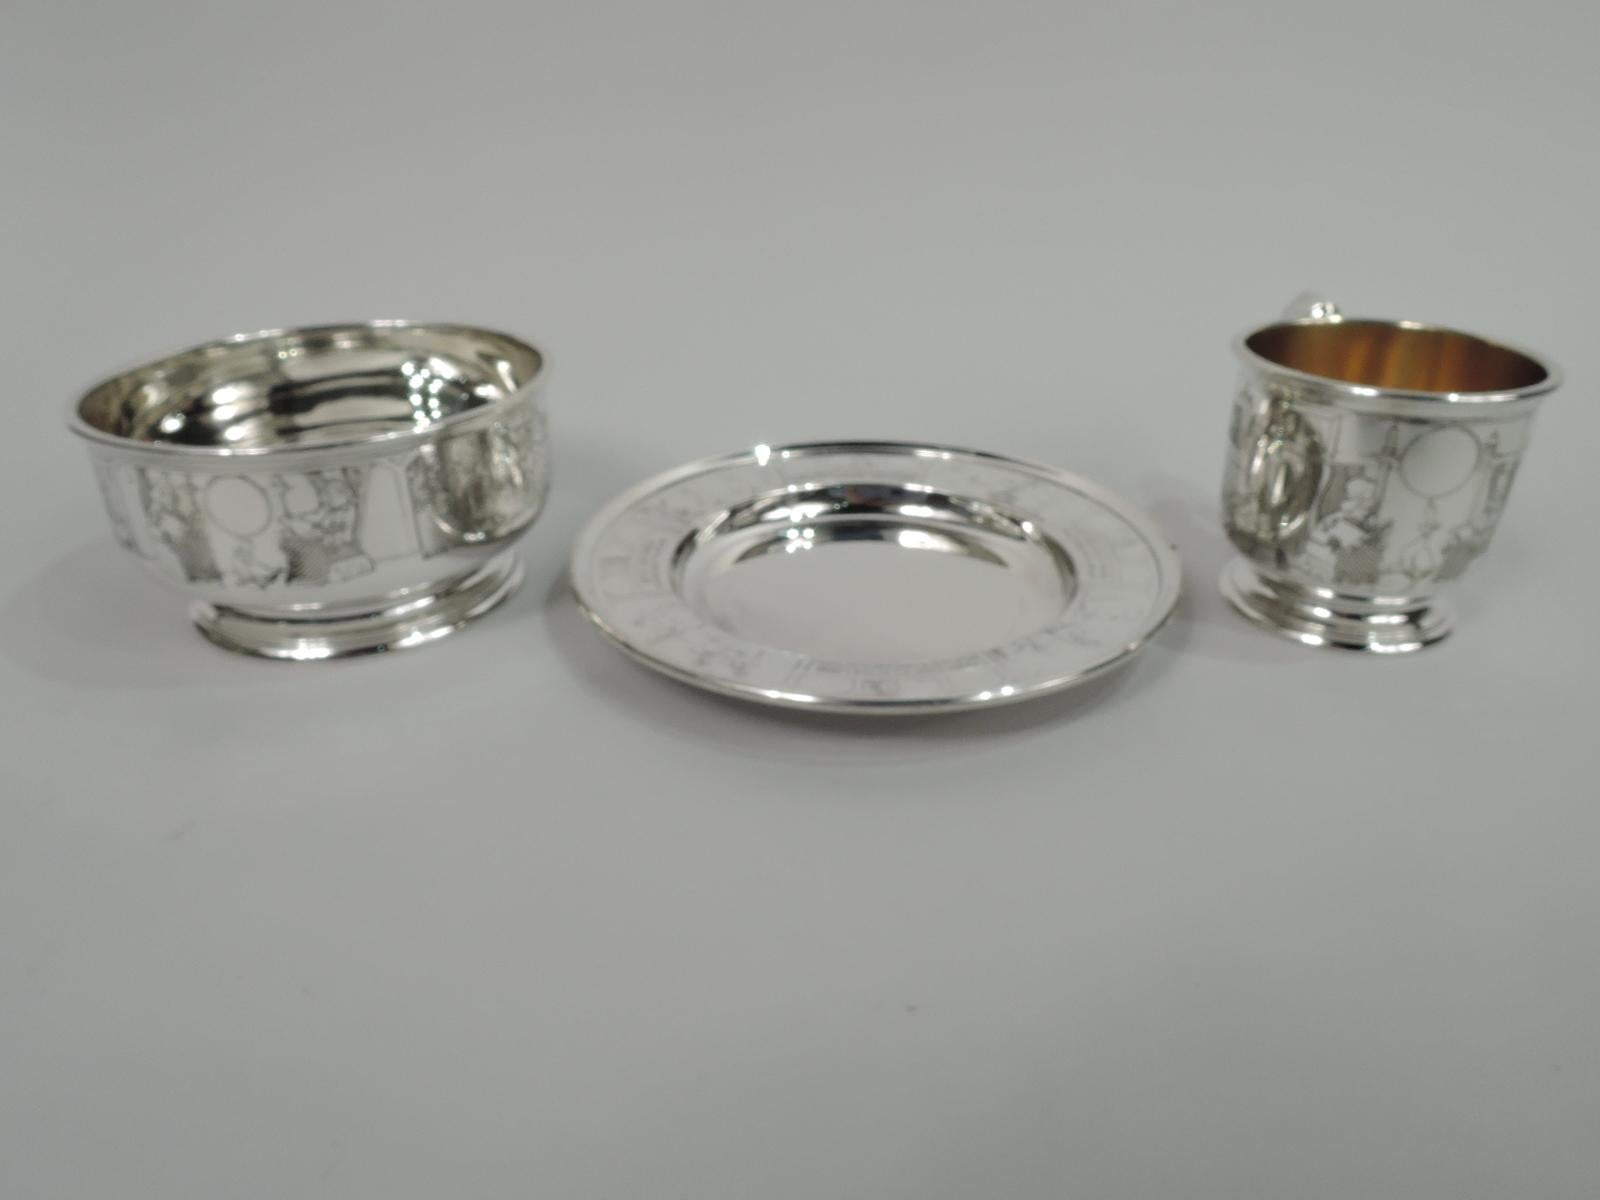 Turn-of-the-century Edwardian sterling silver baby set. Made by Gorham in Providence. This set comprises cup, bowl, and plate. Cup has scroll bracket handle, raised and stepped foot, and gilt interior. Bowl has same foot. Plate has deep well.